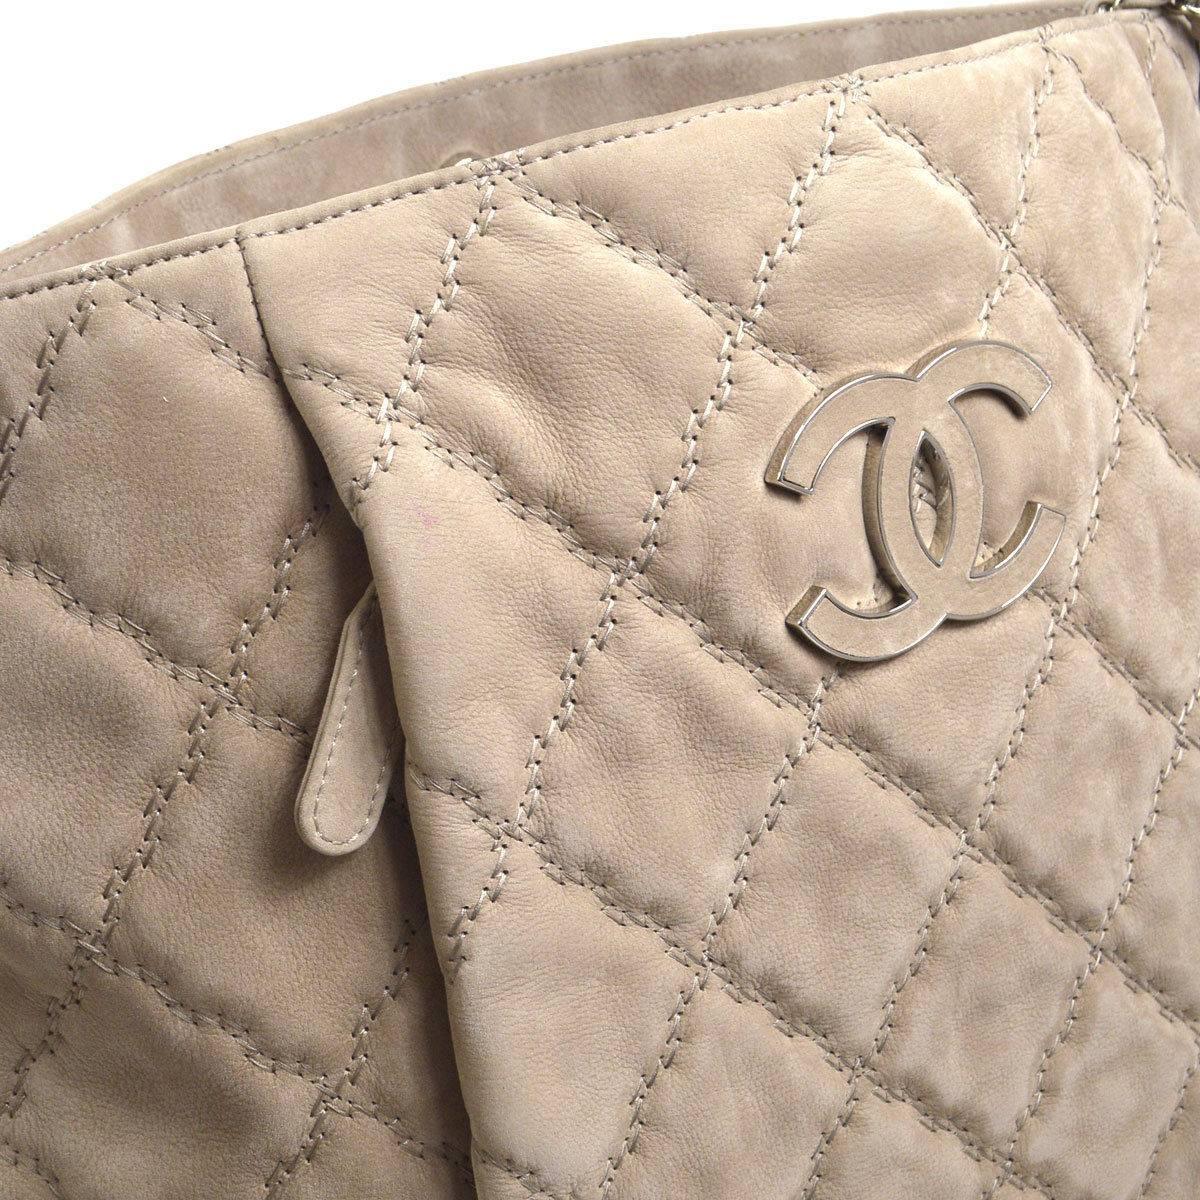 Chanel Nude Tan Suede Leather Silver Carryall Hobo Tote Shoulder Bag

Suede
Leather
Silver tone hardware
Woven lining
Date code present
Made in France
Shoulder strap drop 7